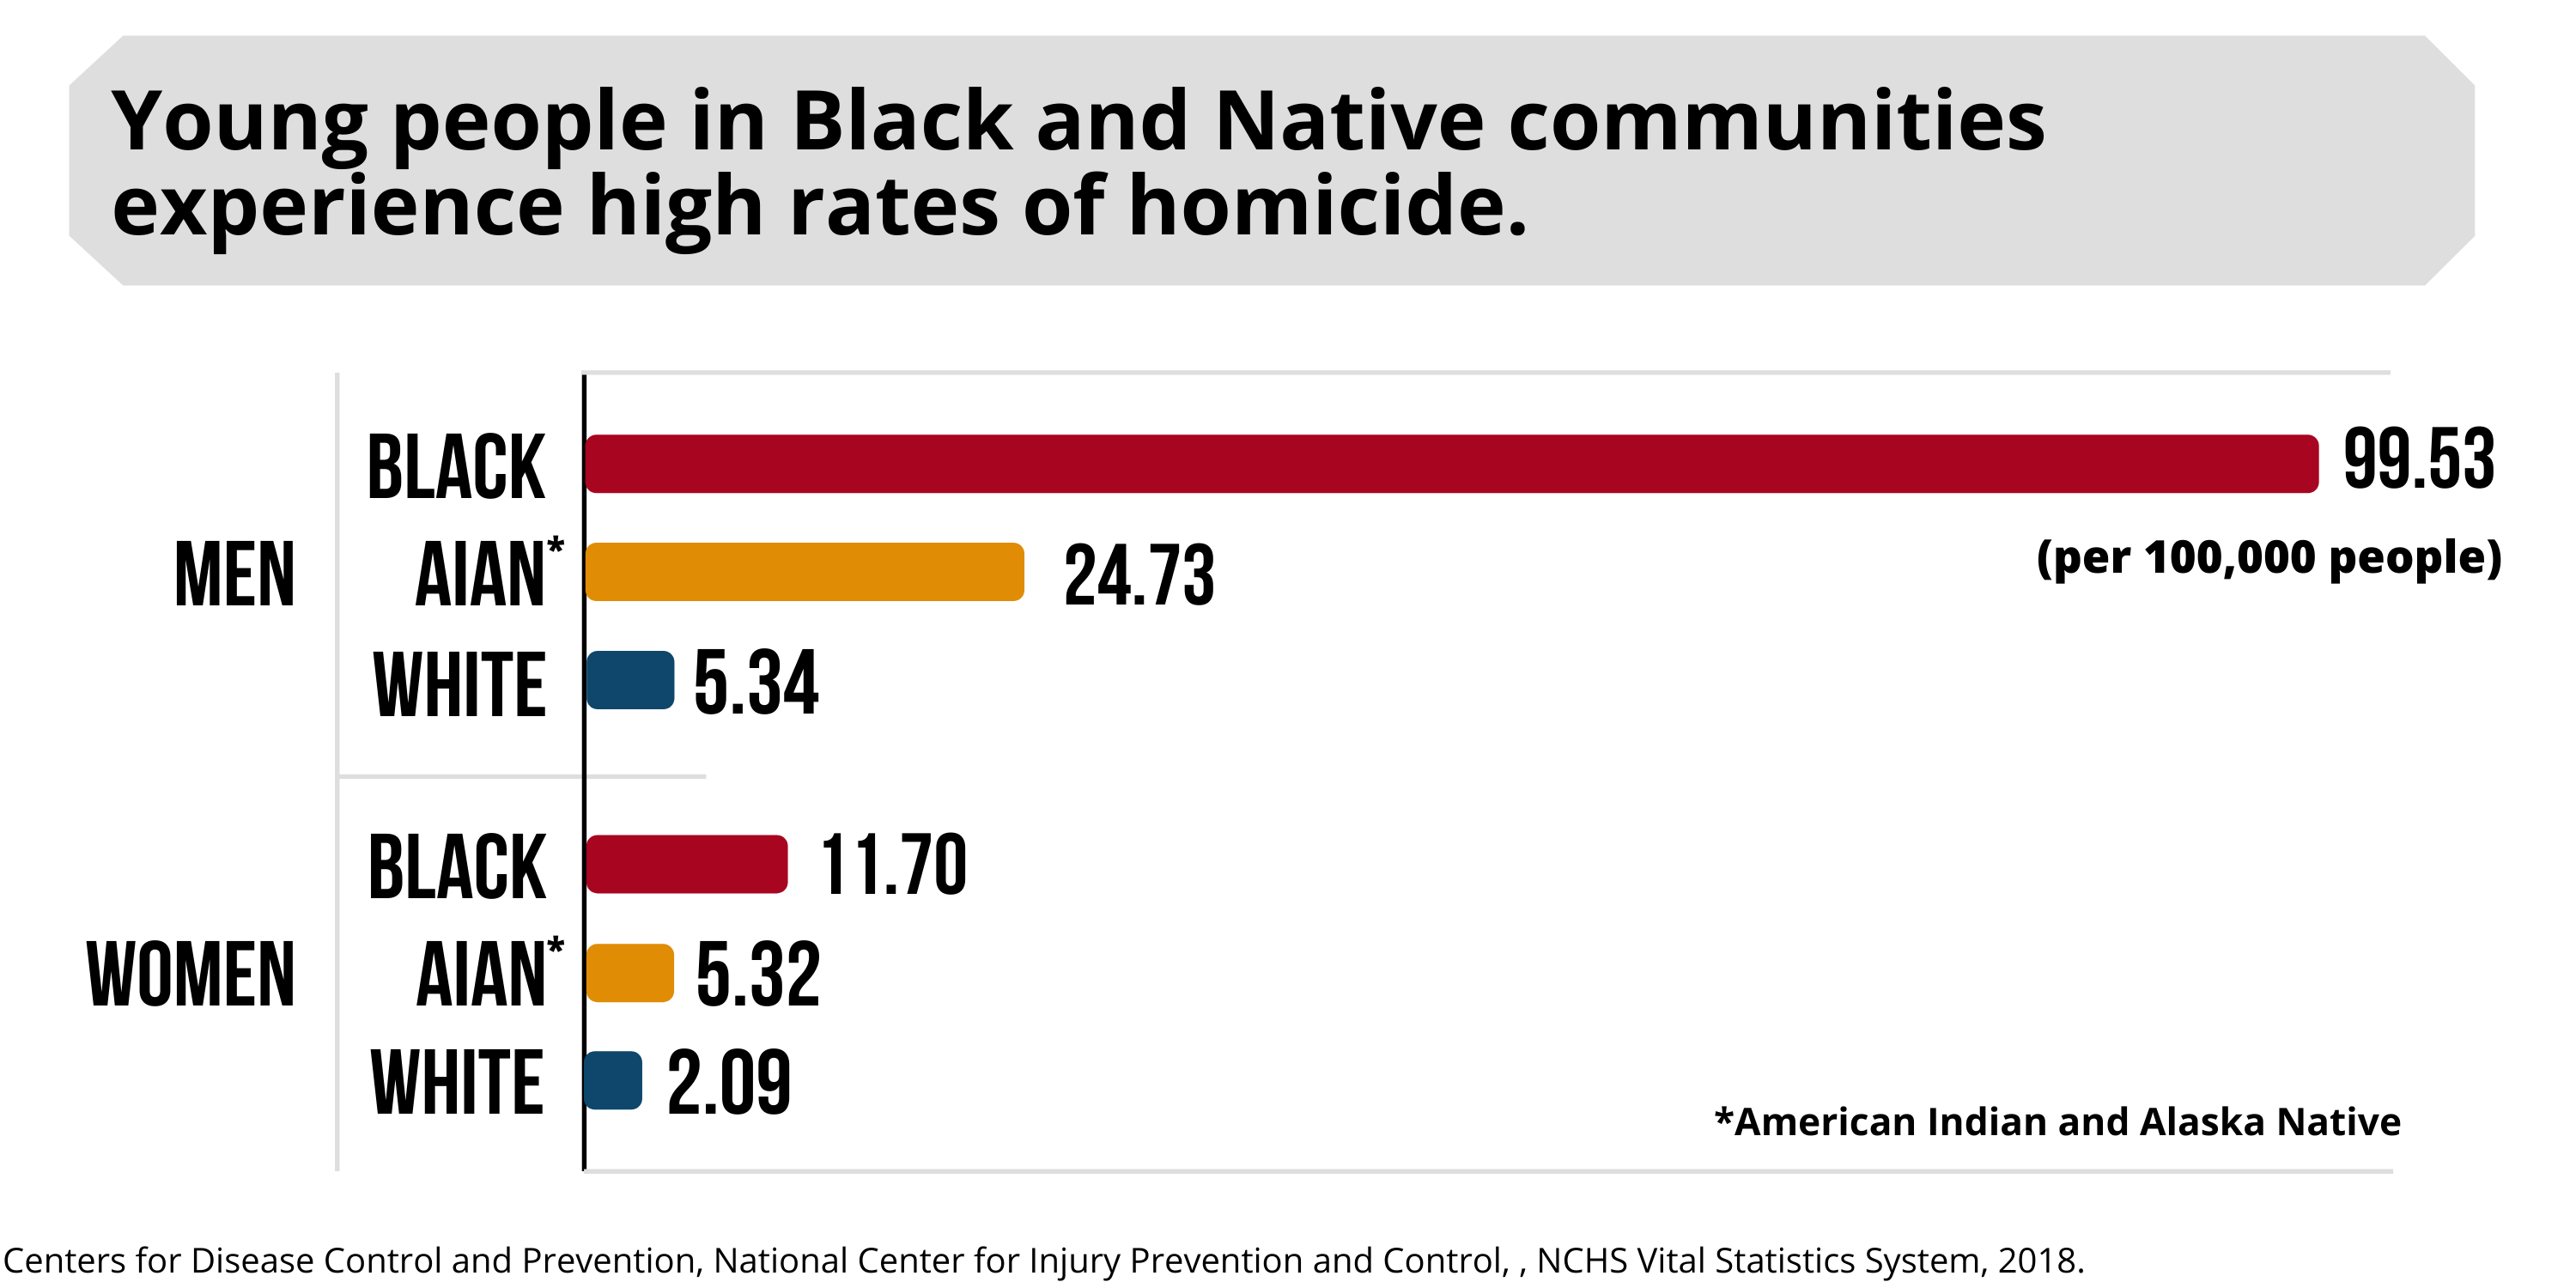 Young people in Black and Native communities experience high rates of homicide.